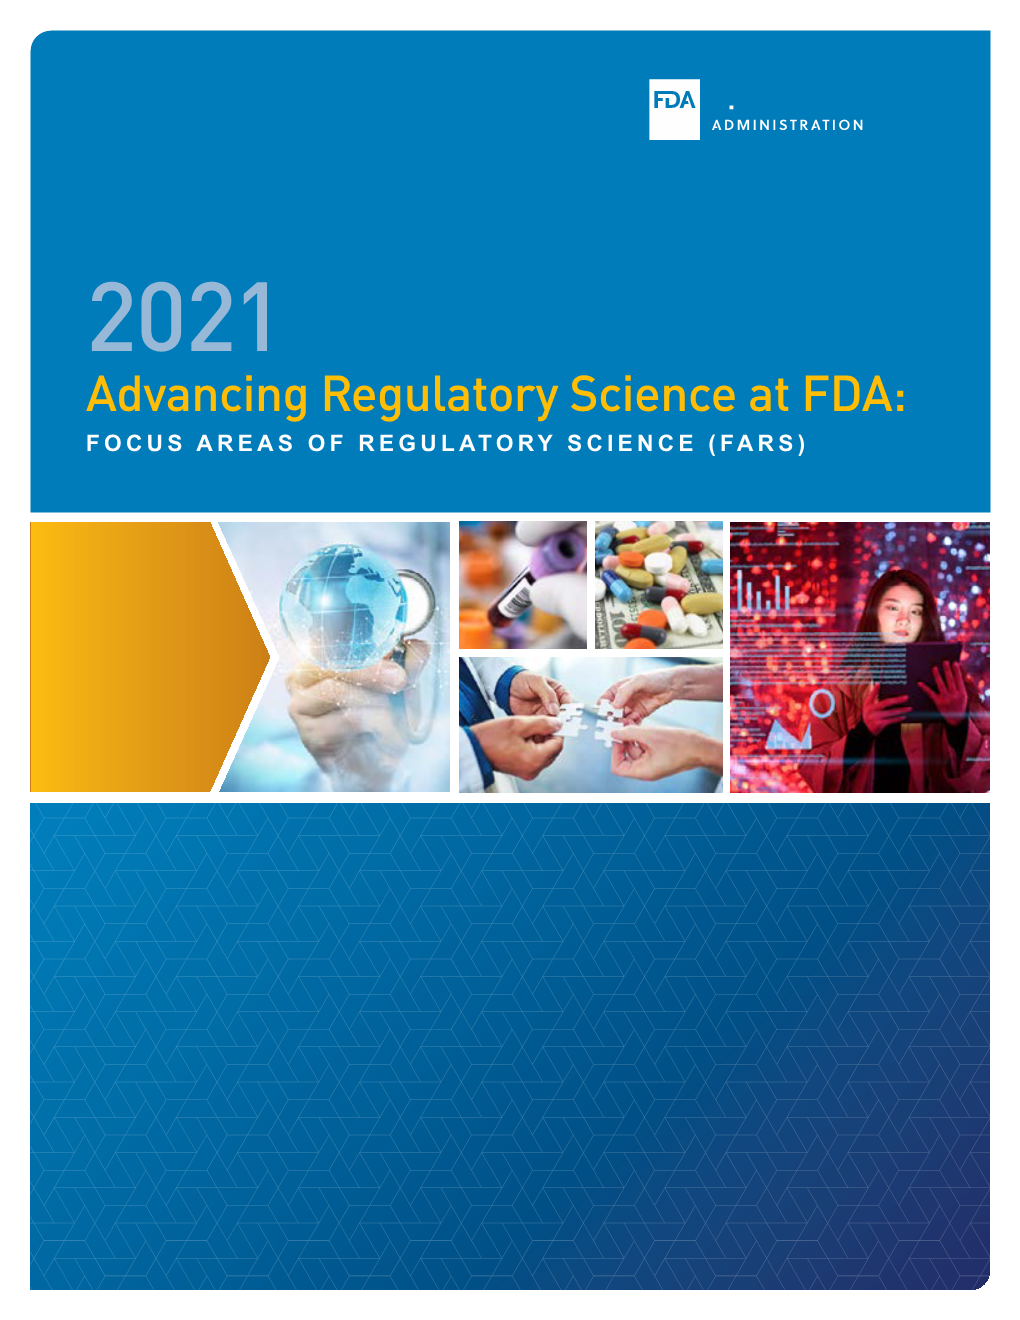 2021 Advancing Regulatory Science at FDA: FOCUS AREAS of REGULATORY SCIENCE (FARS) OPENING STATEMENT from the COMMISSIONER